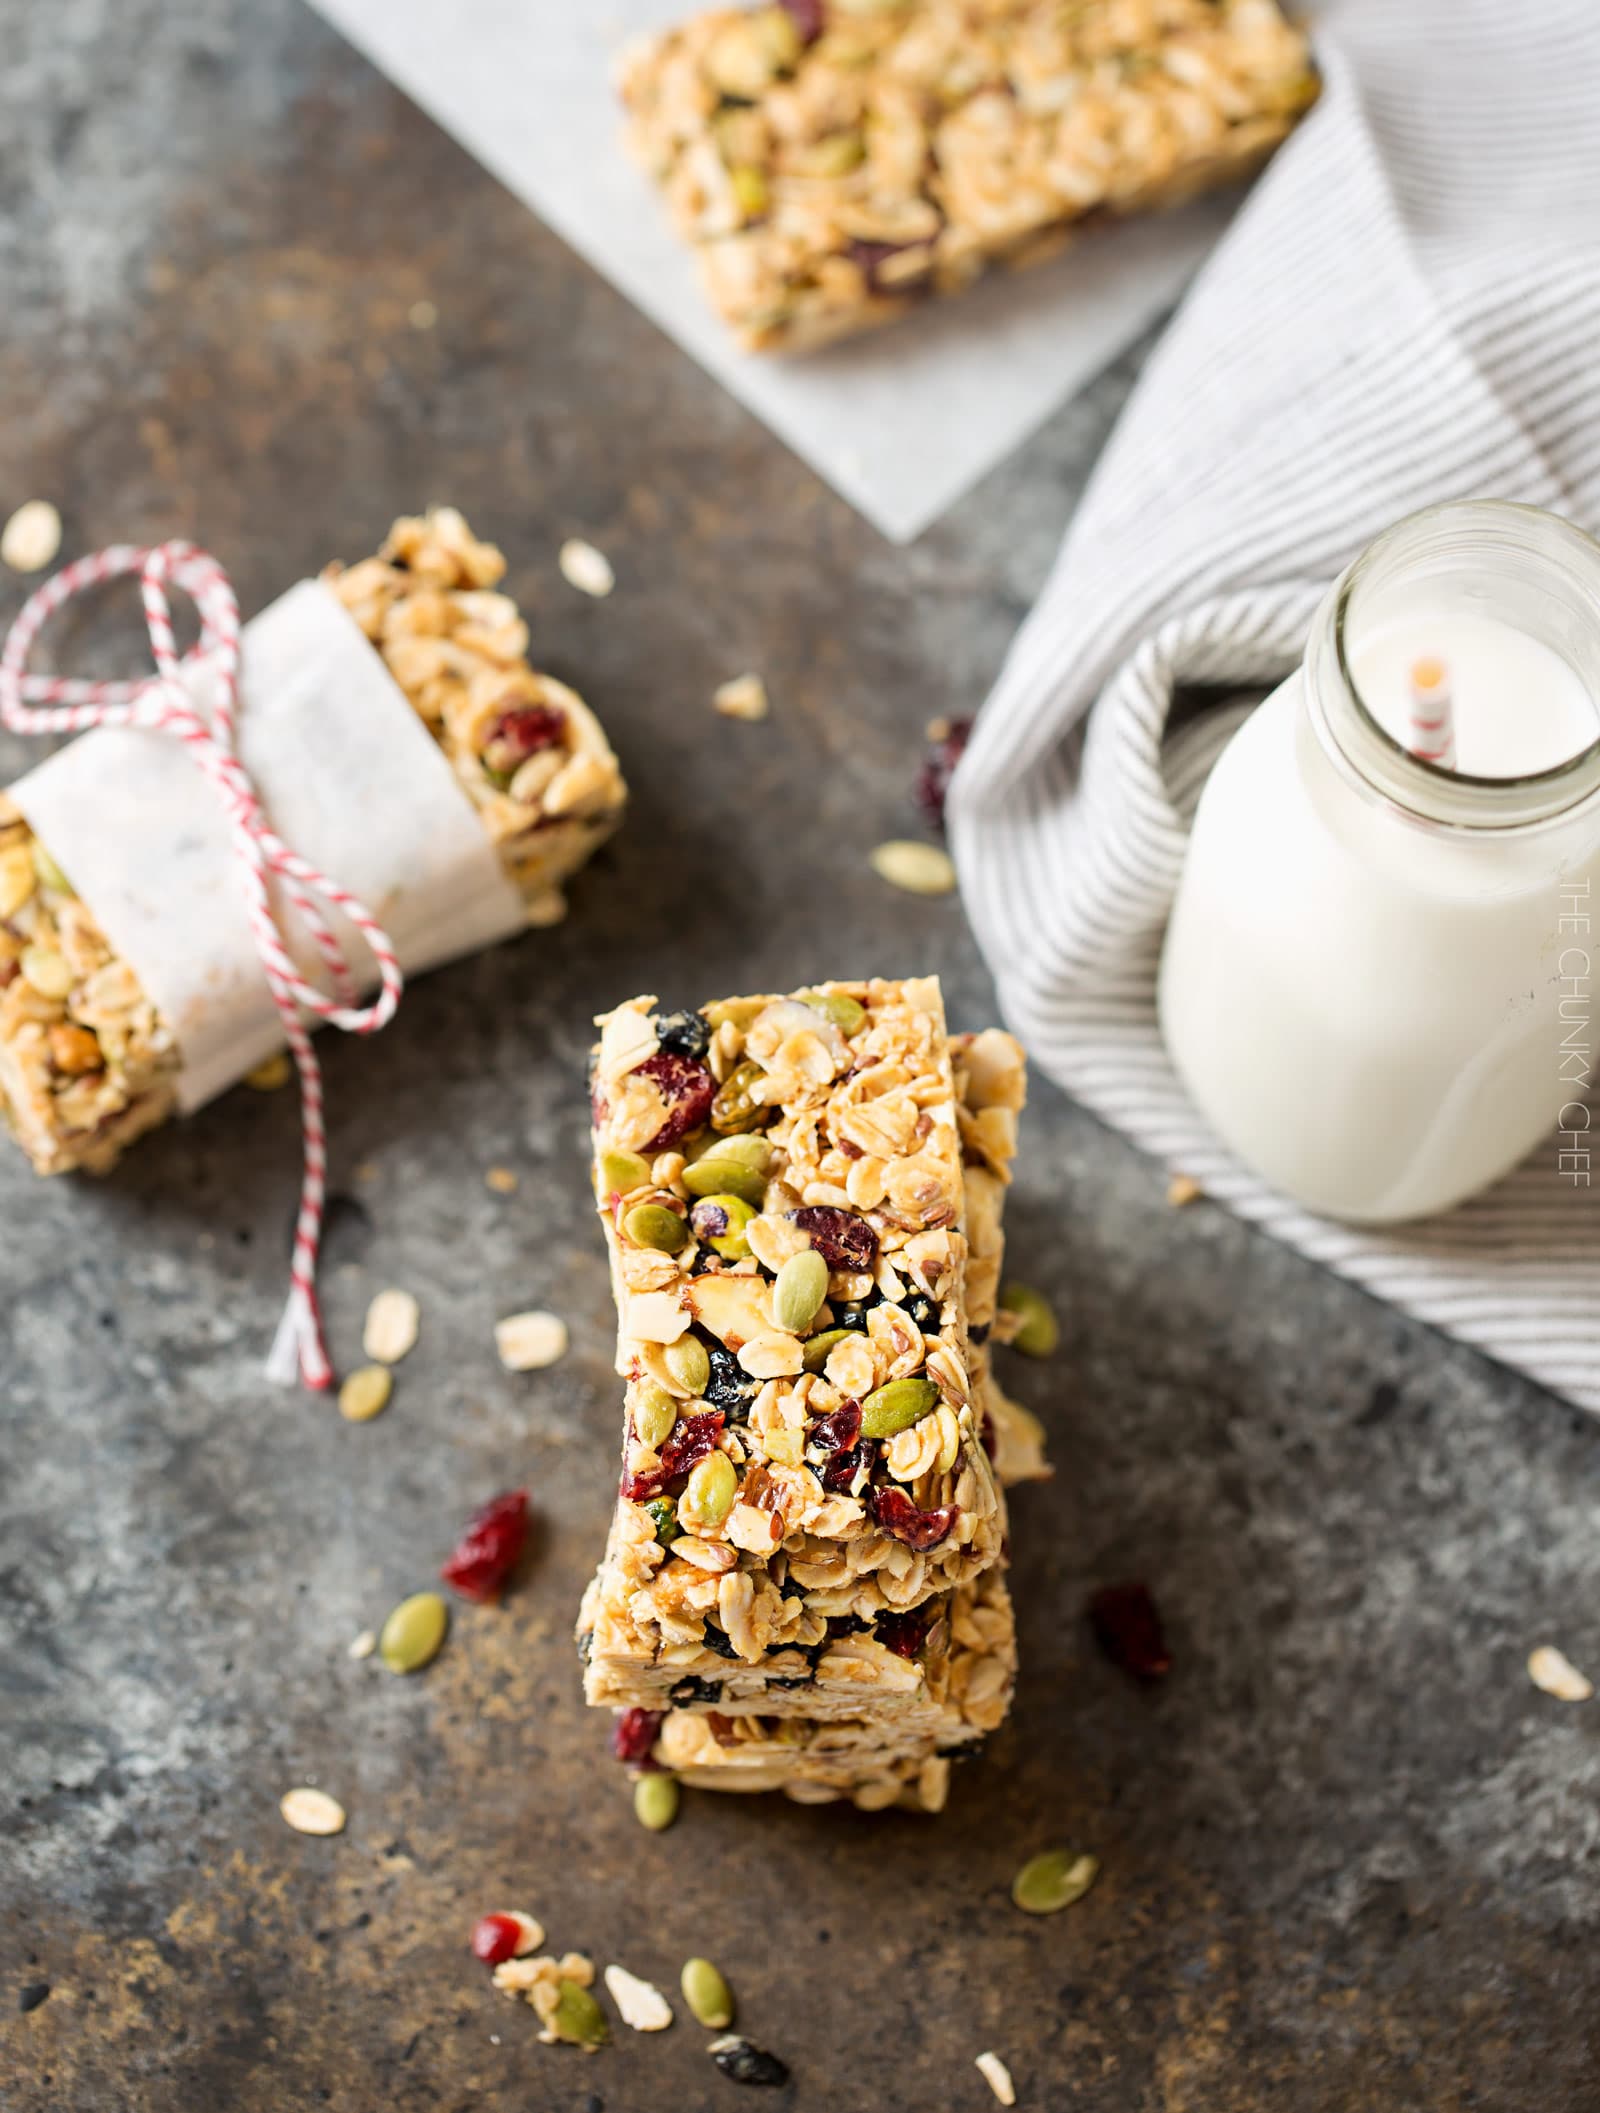 No Bake Chewy Trail Mix Granola Bars | These chewy trail mix granola bars are incredibly easy, no bake, and are naturally sweetened. Make yourself a snack you can feel great about! | http://thechunkychef.com